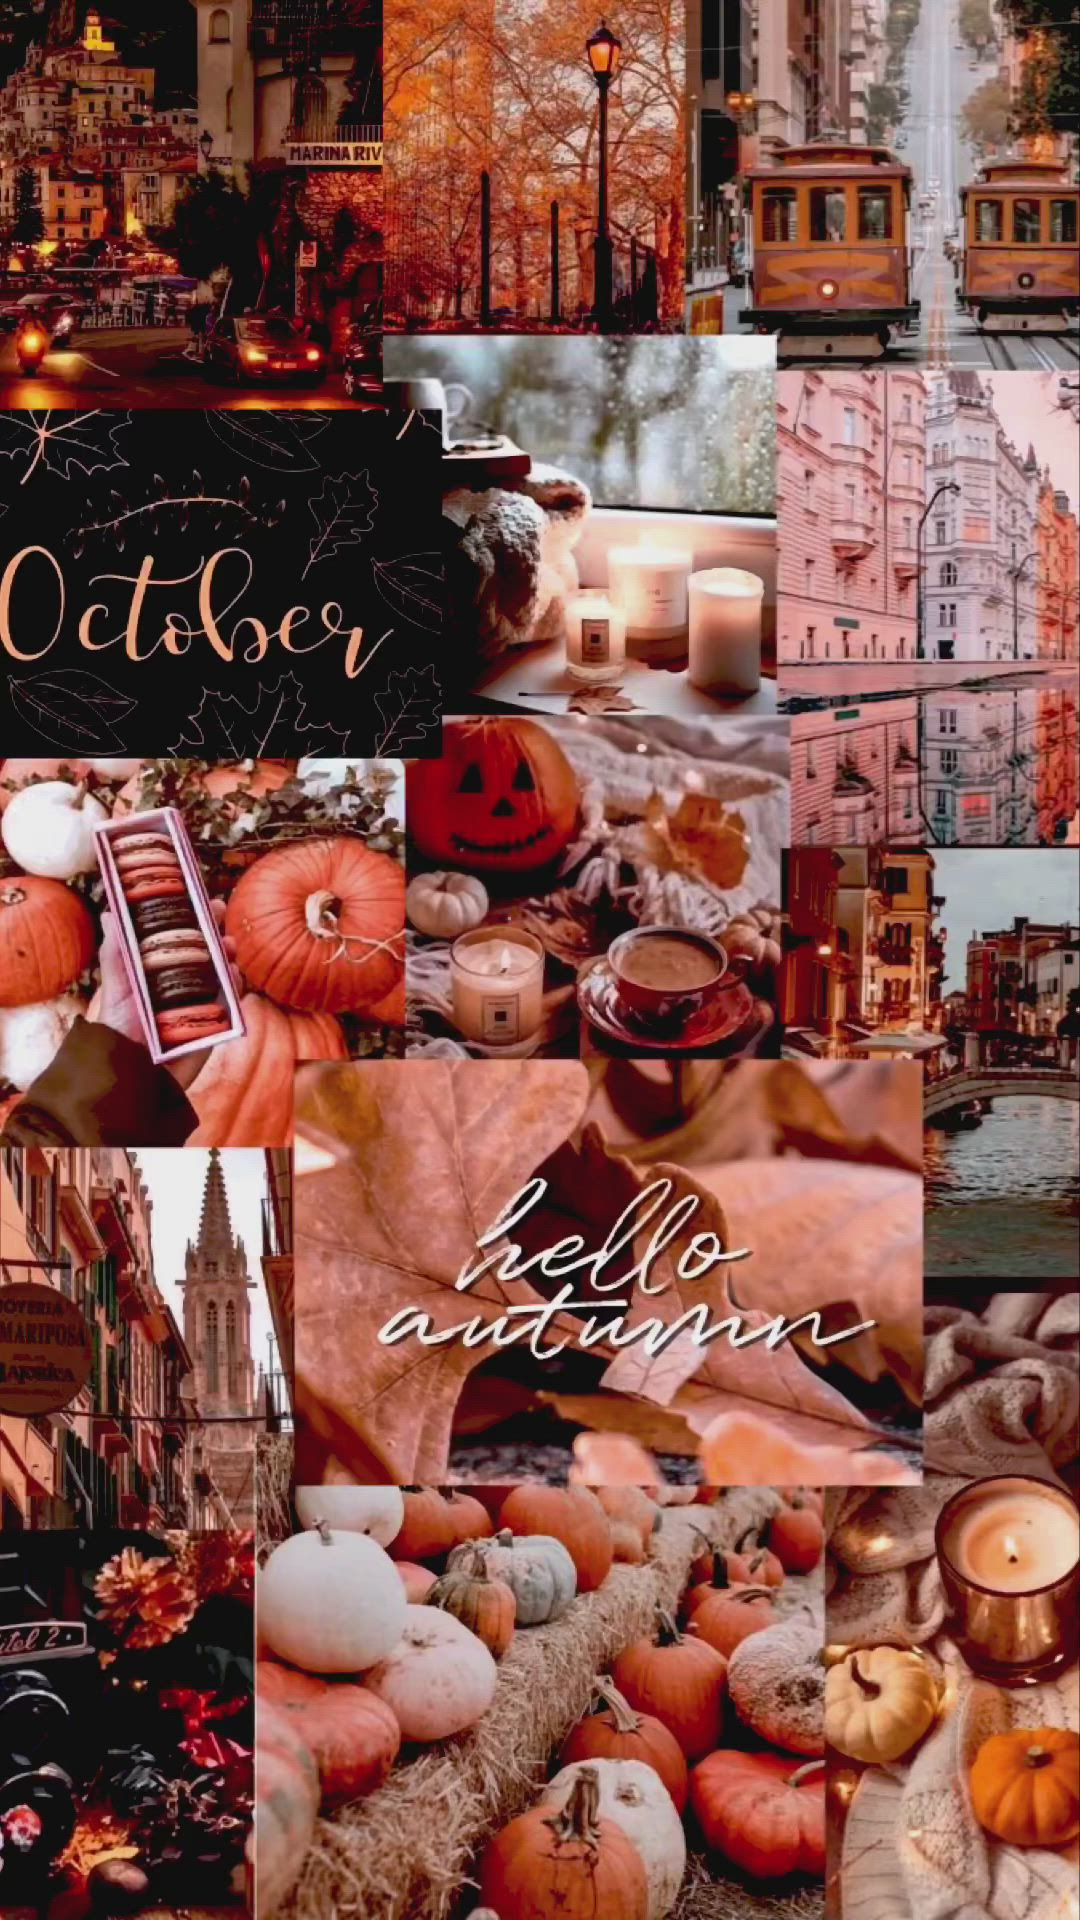 Aesthetic Fall Wallpapers - 4k, HD Aesthetic Fall Backgrounds on ...